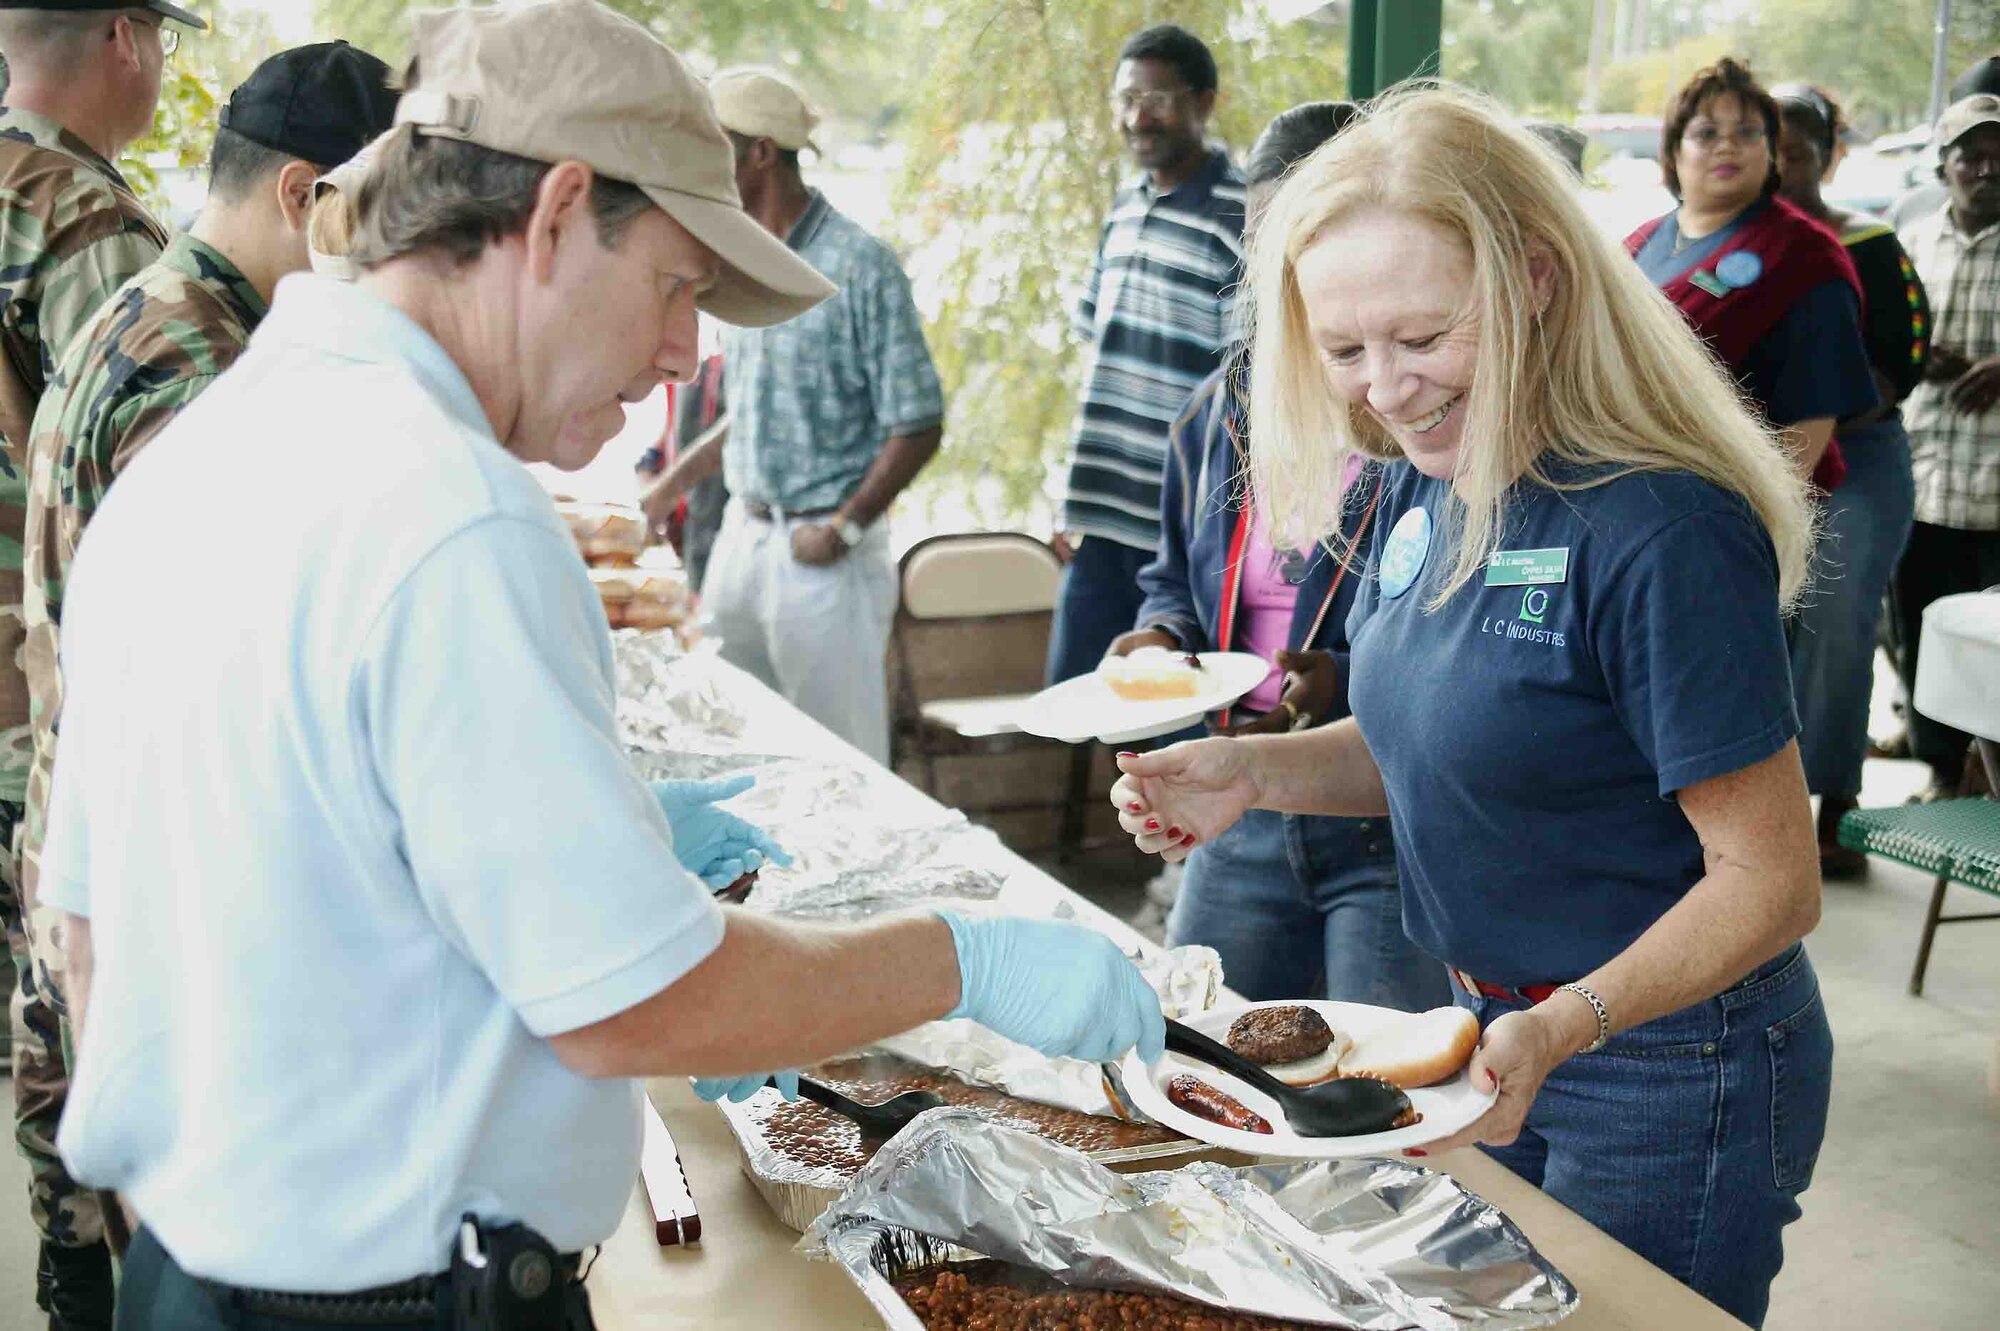 SHAW AIR FORCE BASE, S.C. -- Chris Silva (right), manager of LC Industries, fills up her plate during the annual AbilityOne appreciation picnic Oct. 19. The program provides employment opportunities for people who are blind or have other severe disabilities in the manufacture and delivery of products and services to the federal government. (U.S. Air Force photo/Staff Sgt. John Gordinier)